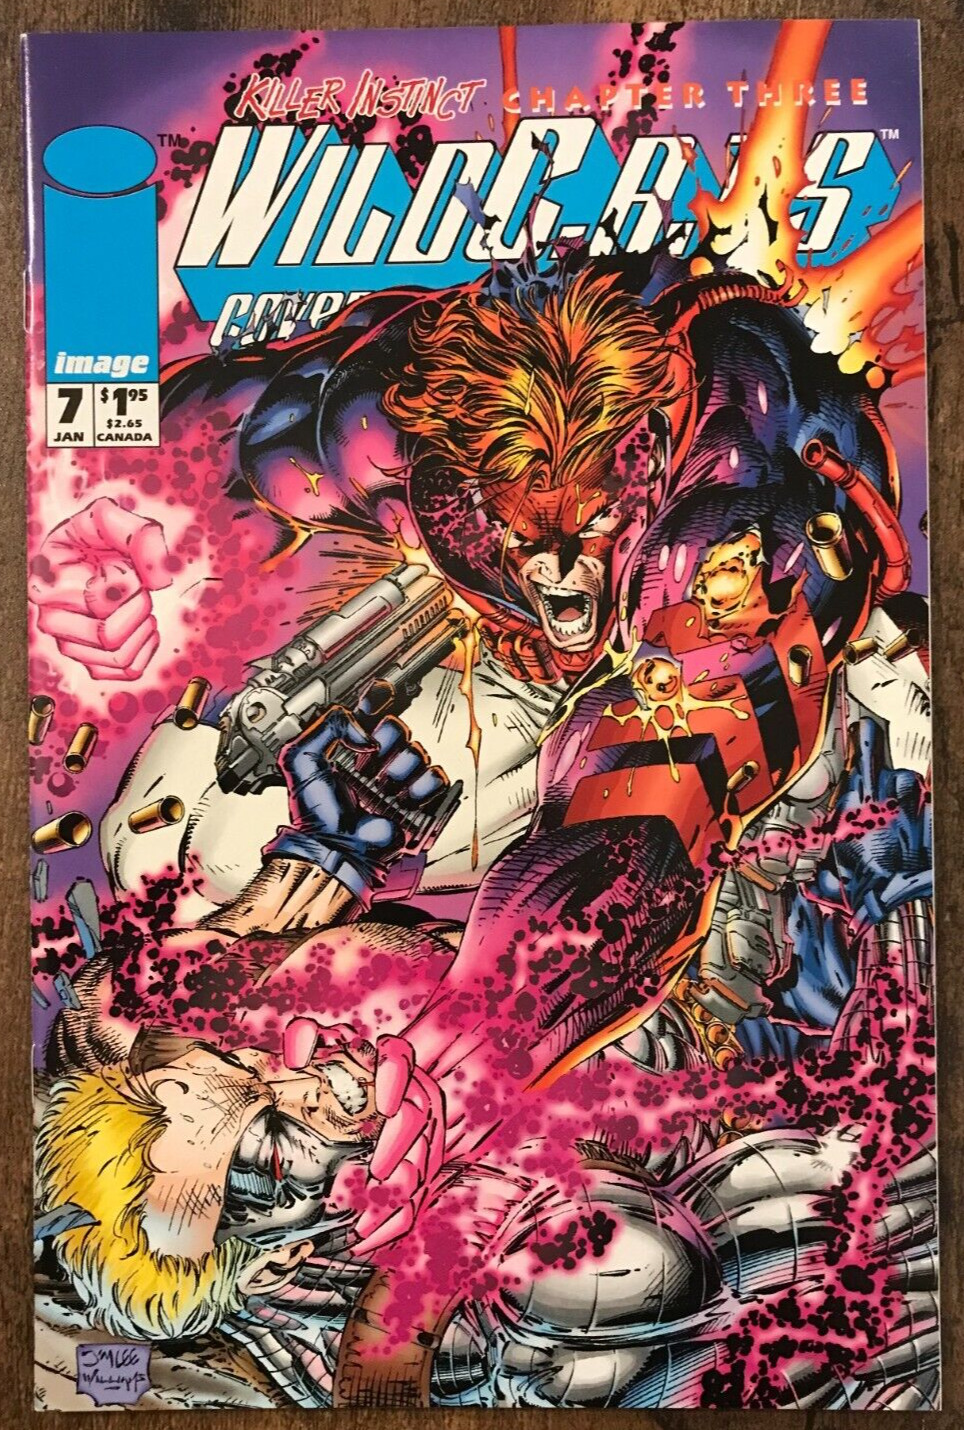 Wildcats #7 By Jim Lee Choi Cyberforce Killer Instinct Variant A Image NM/M 1994